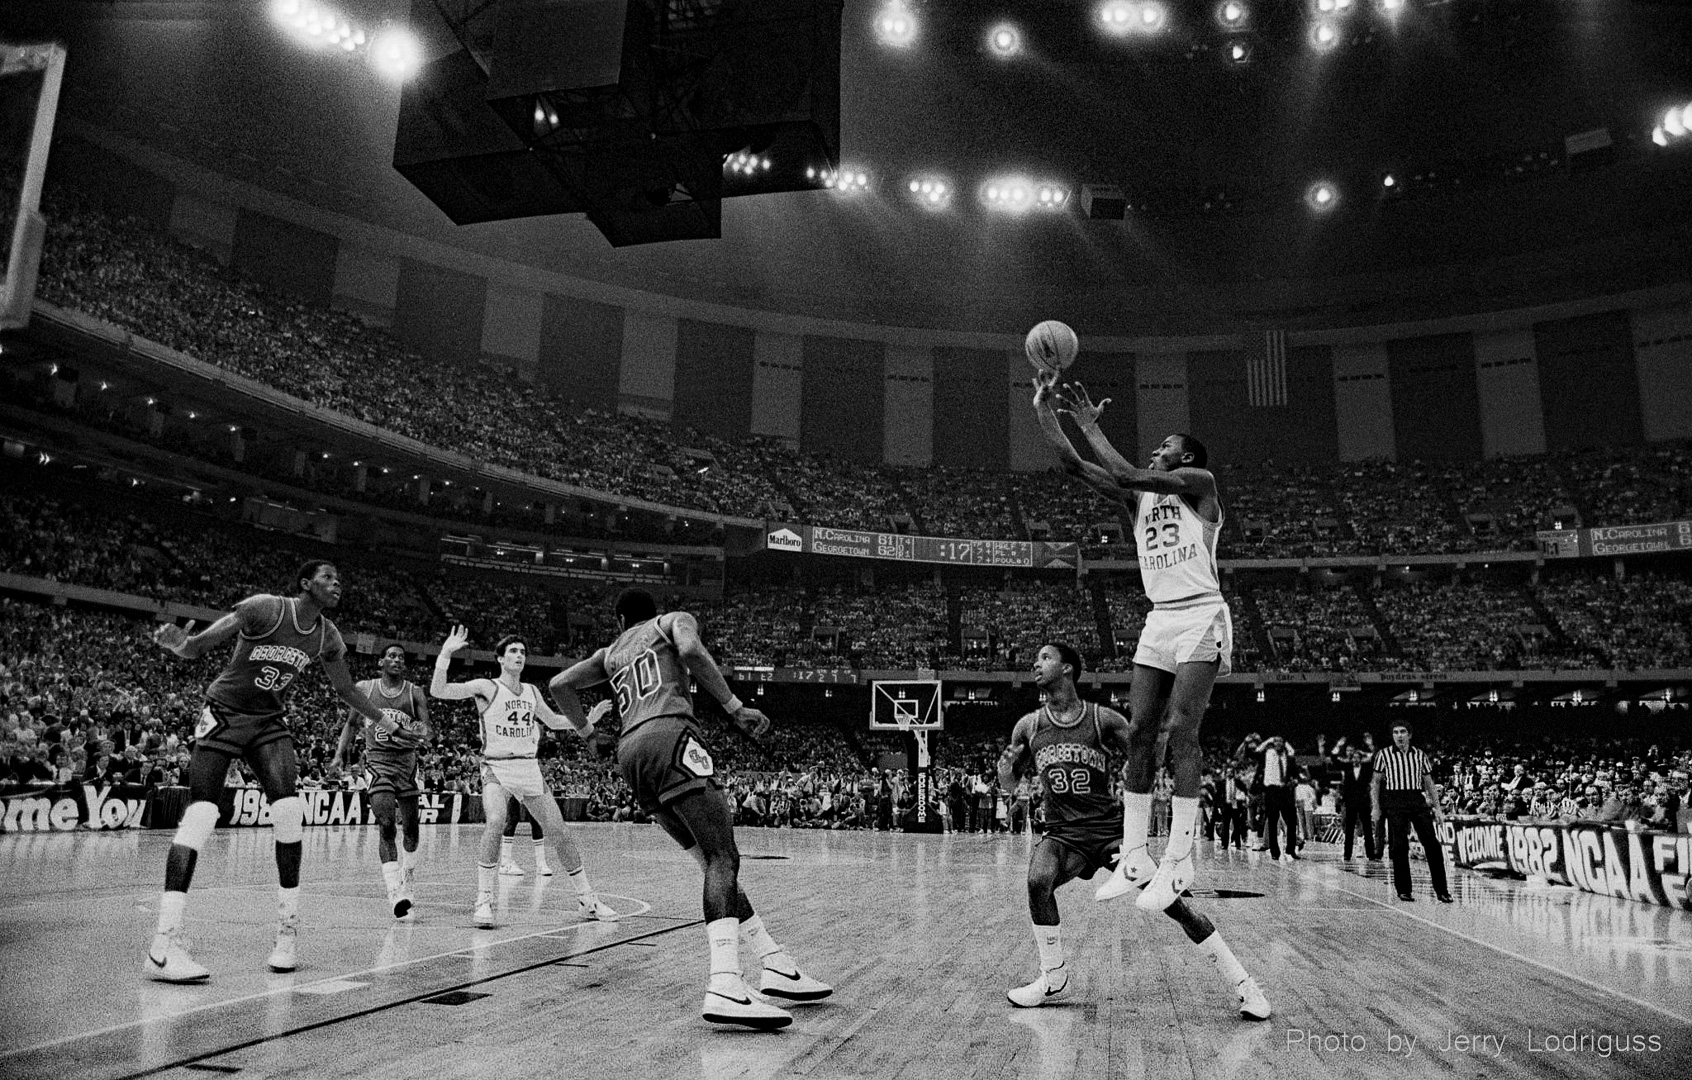 Michael Jordan hits the game-winning jump shot to beat Georgetown and claim the 1982 NCAA basketball national championship for the North Carolina Tarheels in the Louisiana Superdome in New Orleans.